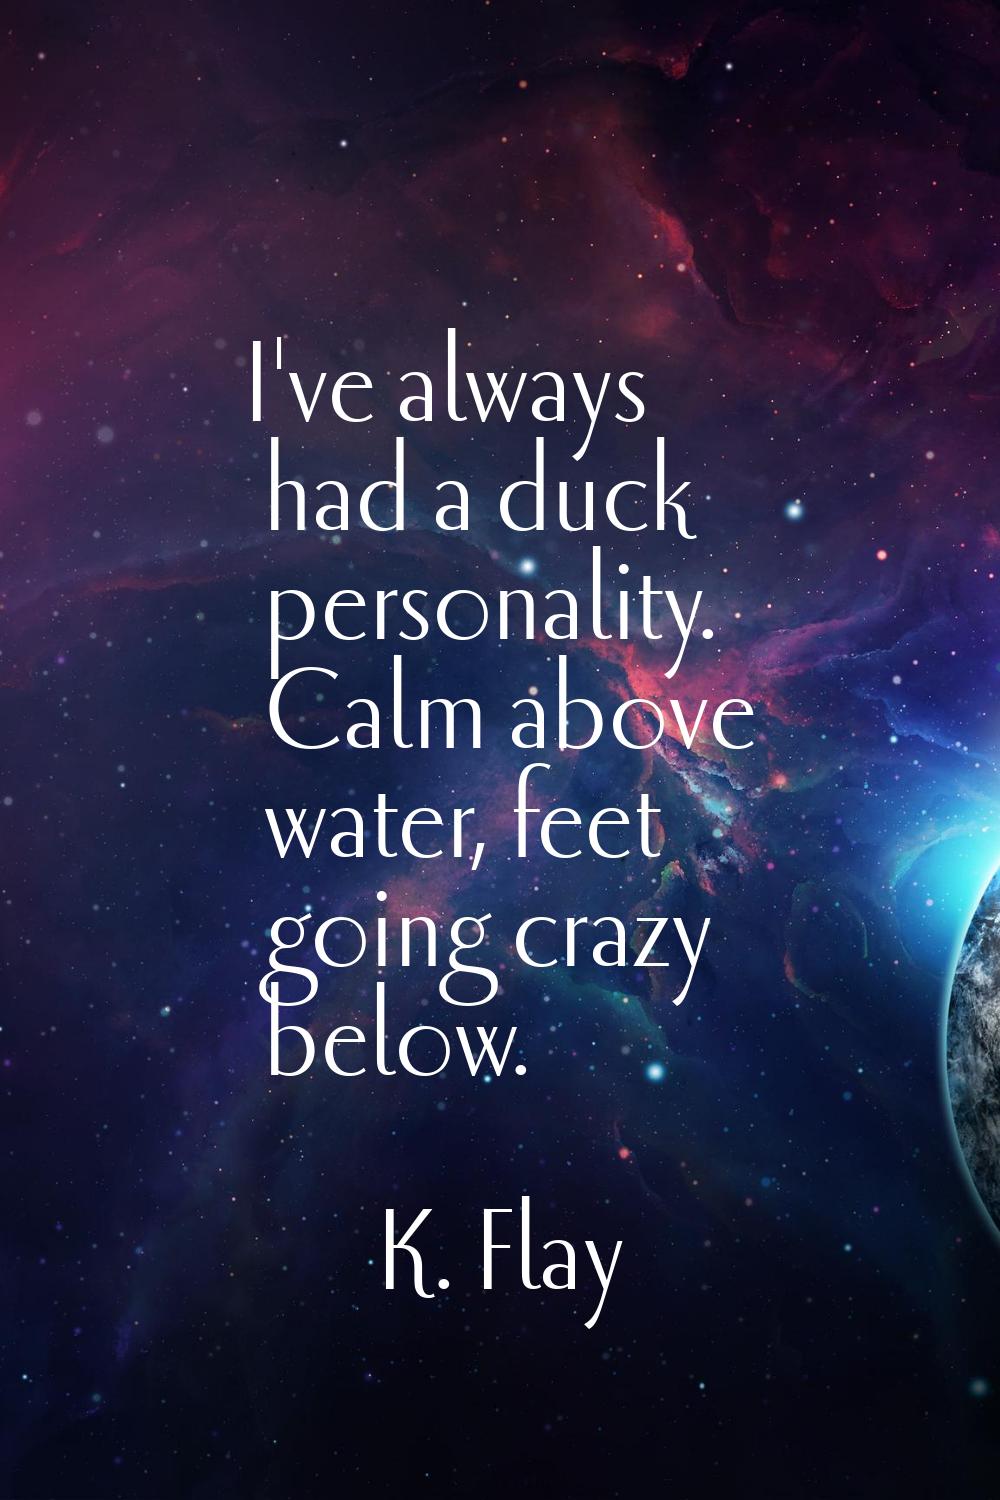 I've always had a duck personality. Calm above water, feet going crazy below.